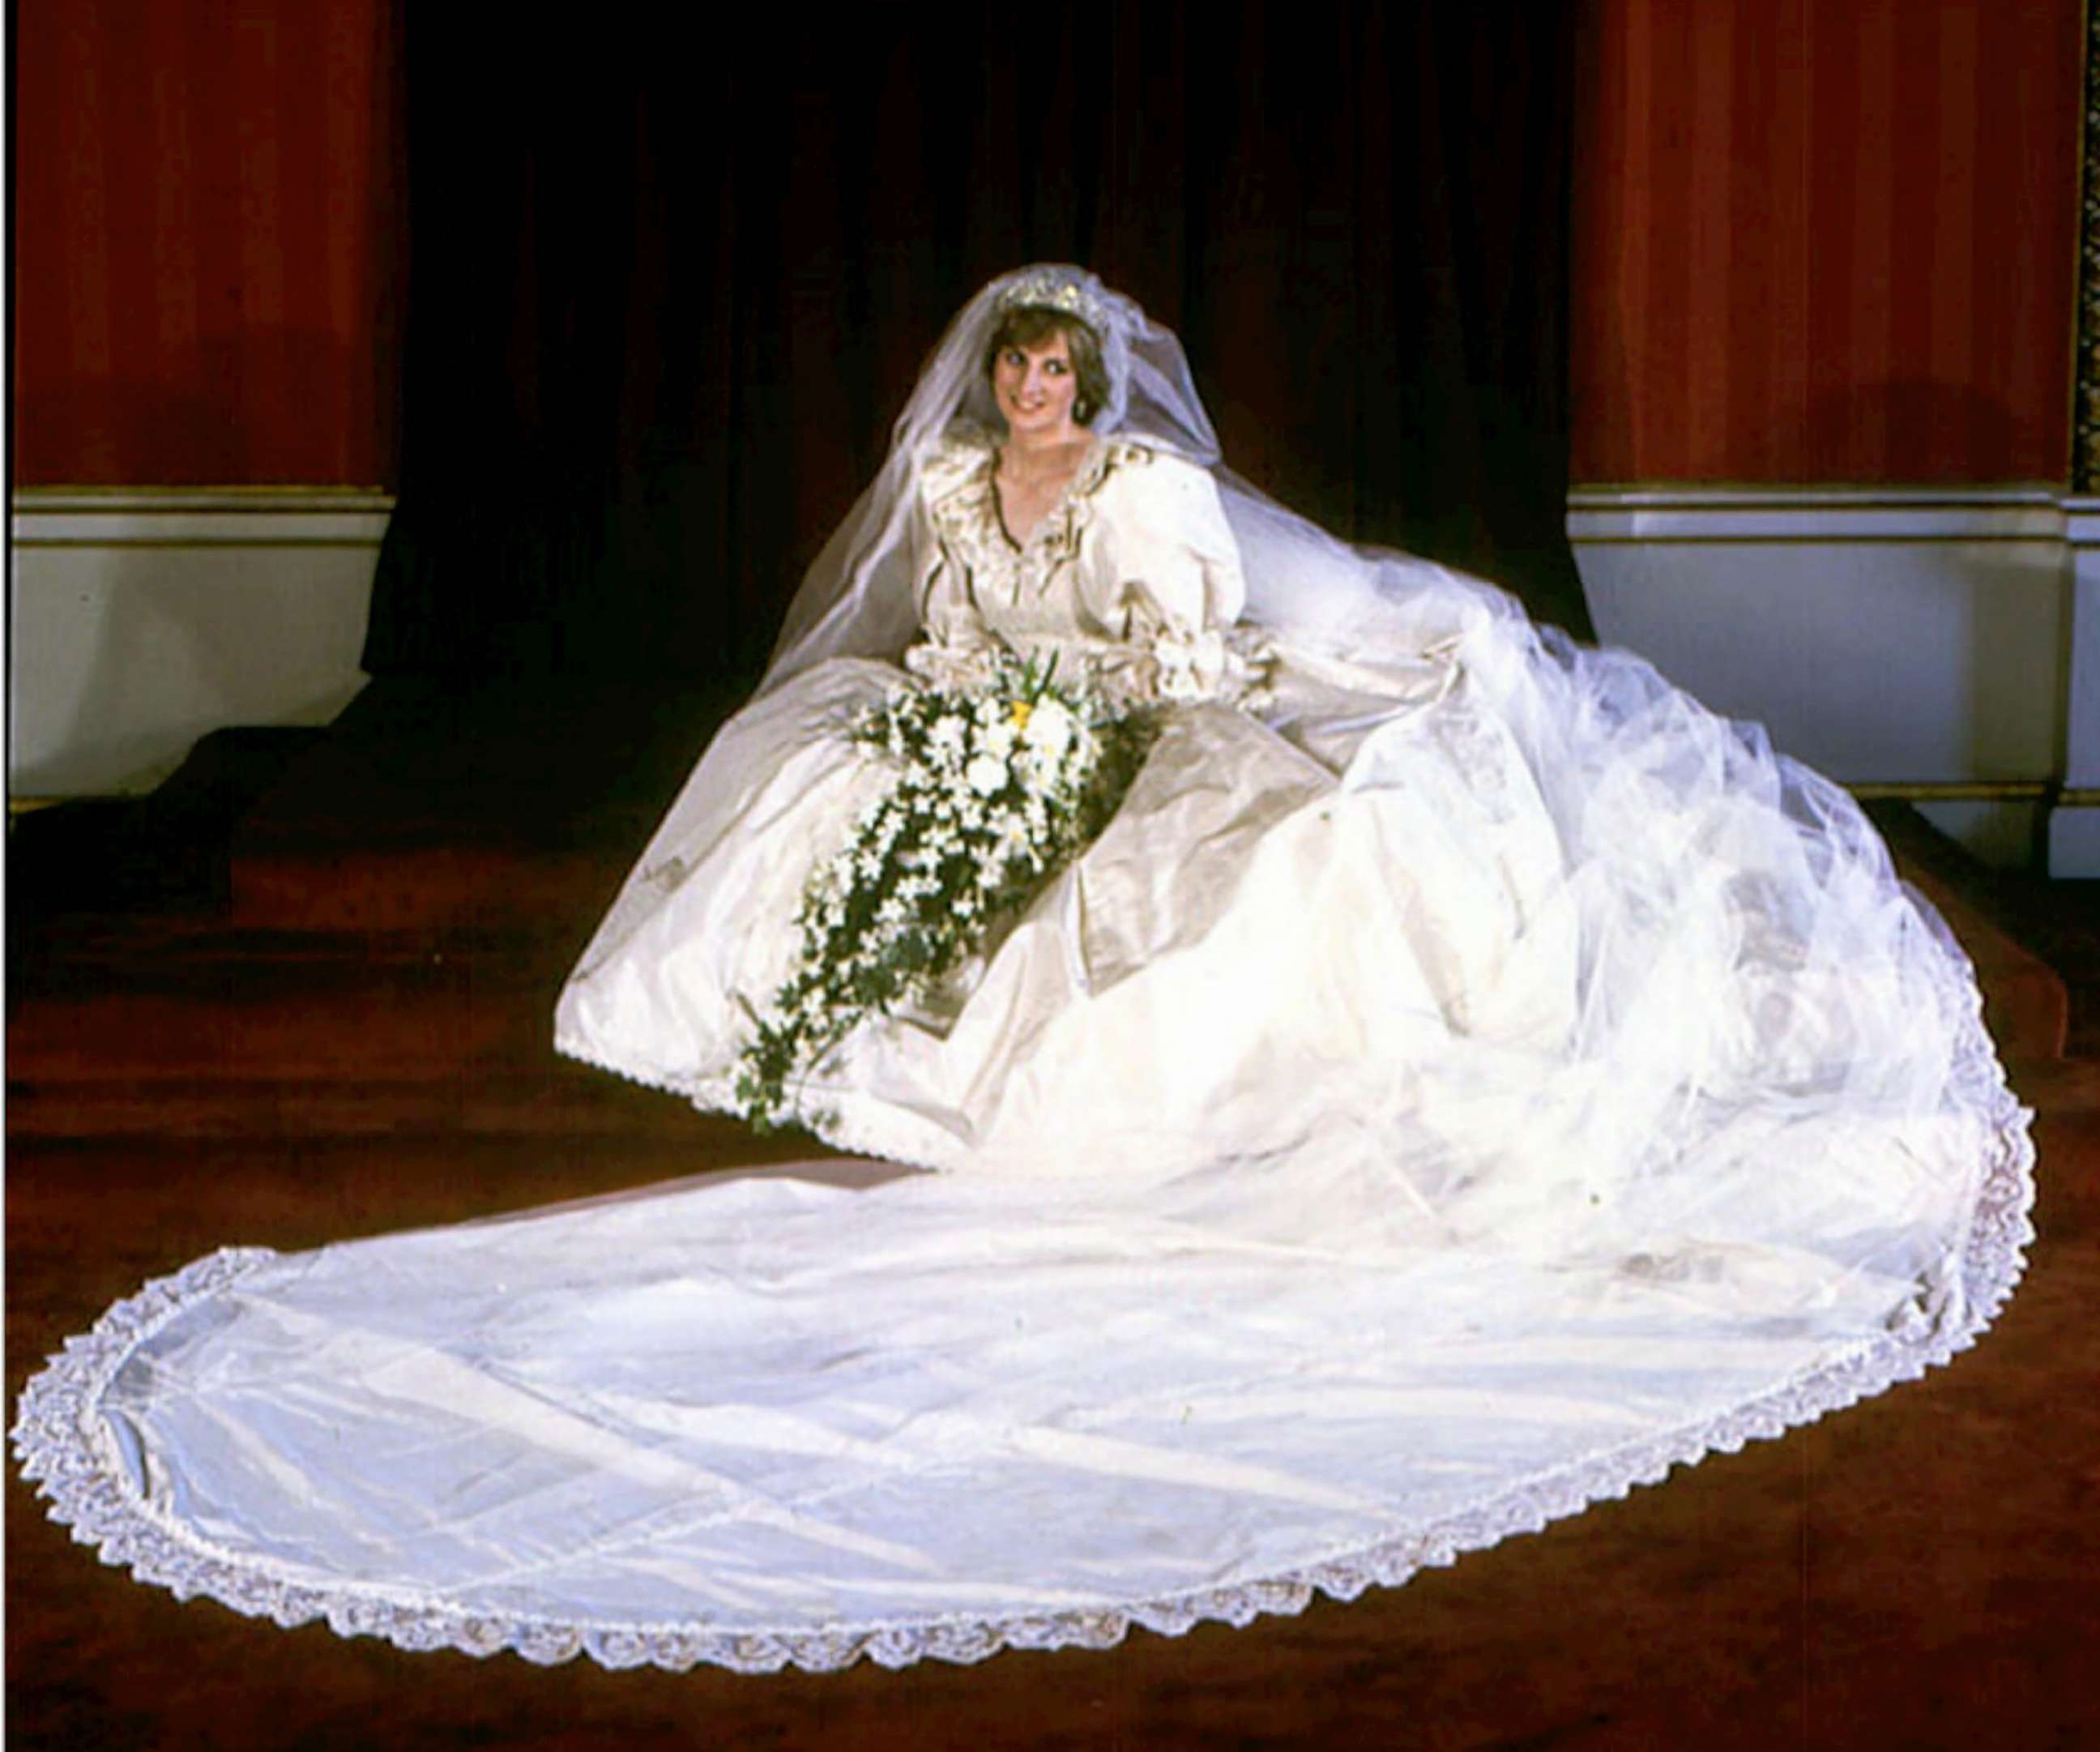 PHOTO: Diana, Princess of Wales, in her wedding dress worn at her wedding to Prince Charles in London, July 29, 1981.  